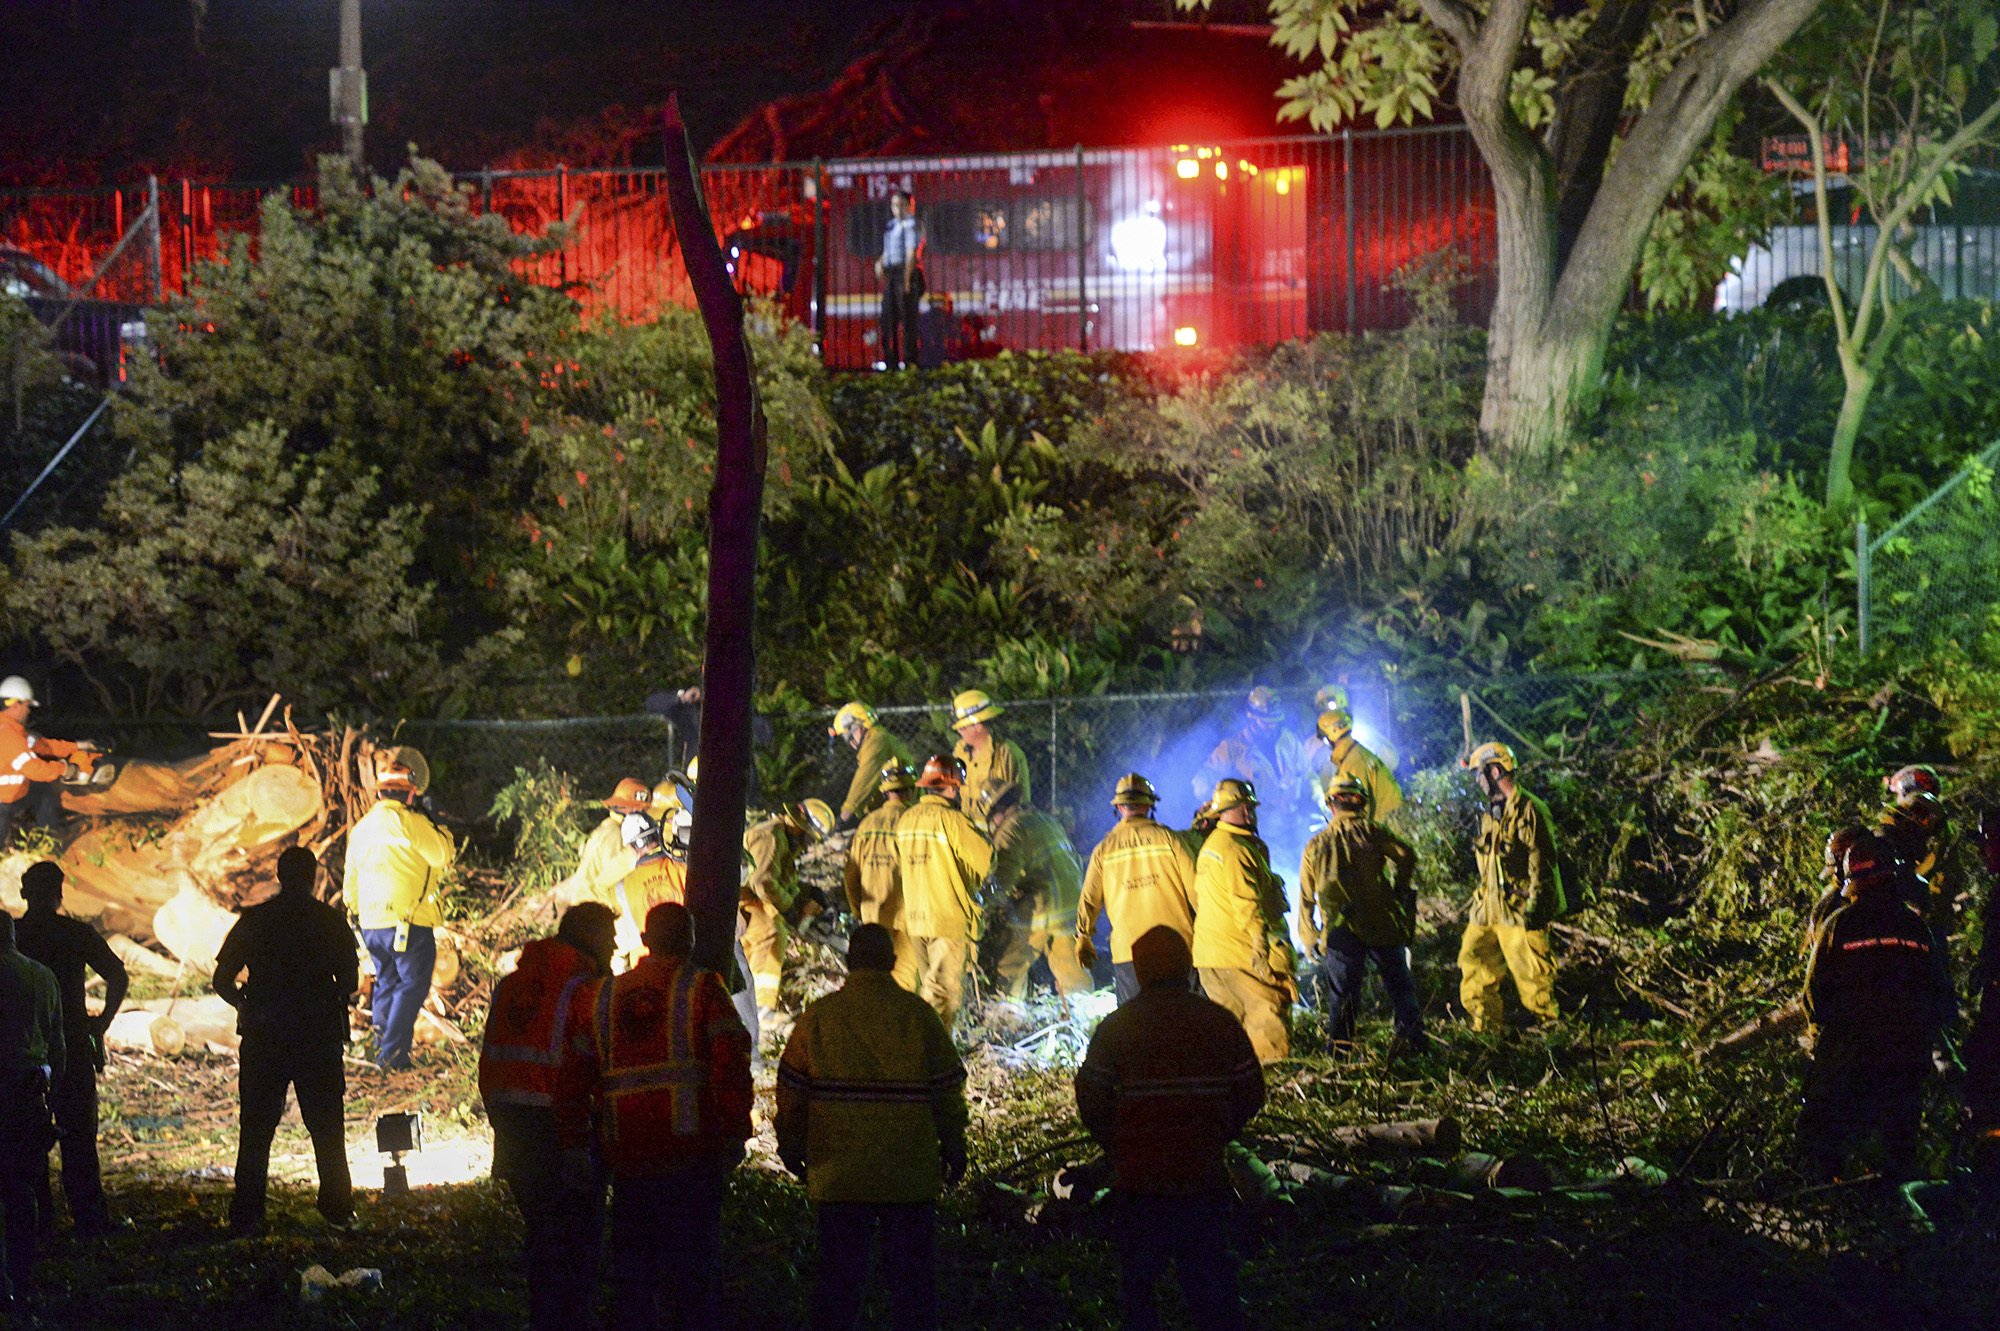 PHOTO: Los Angeles County Fire Dept. firefighters work at the scene where a large tree fell on a wedding party in Whittier, California, Dec. 17, 2016. 